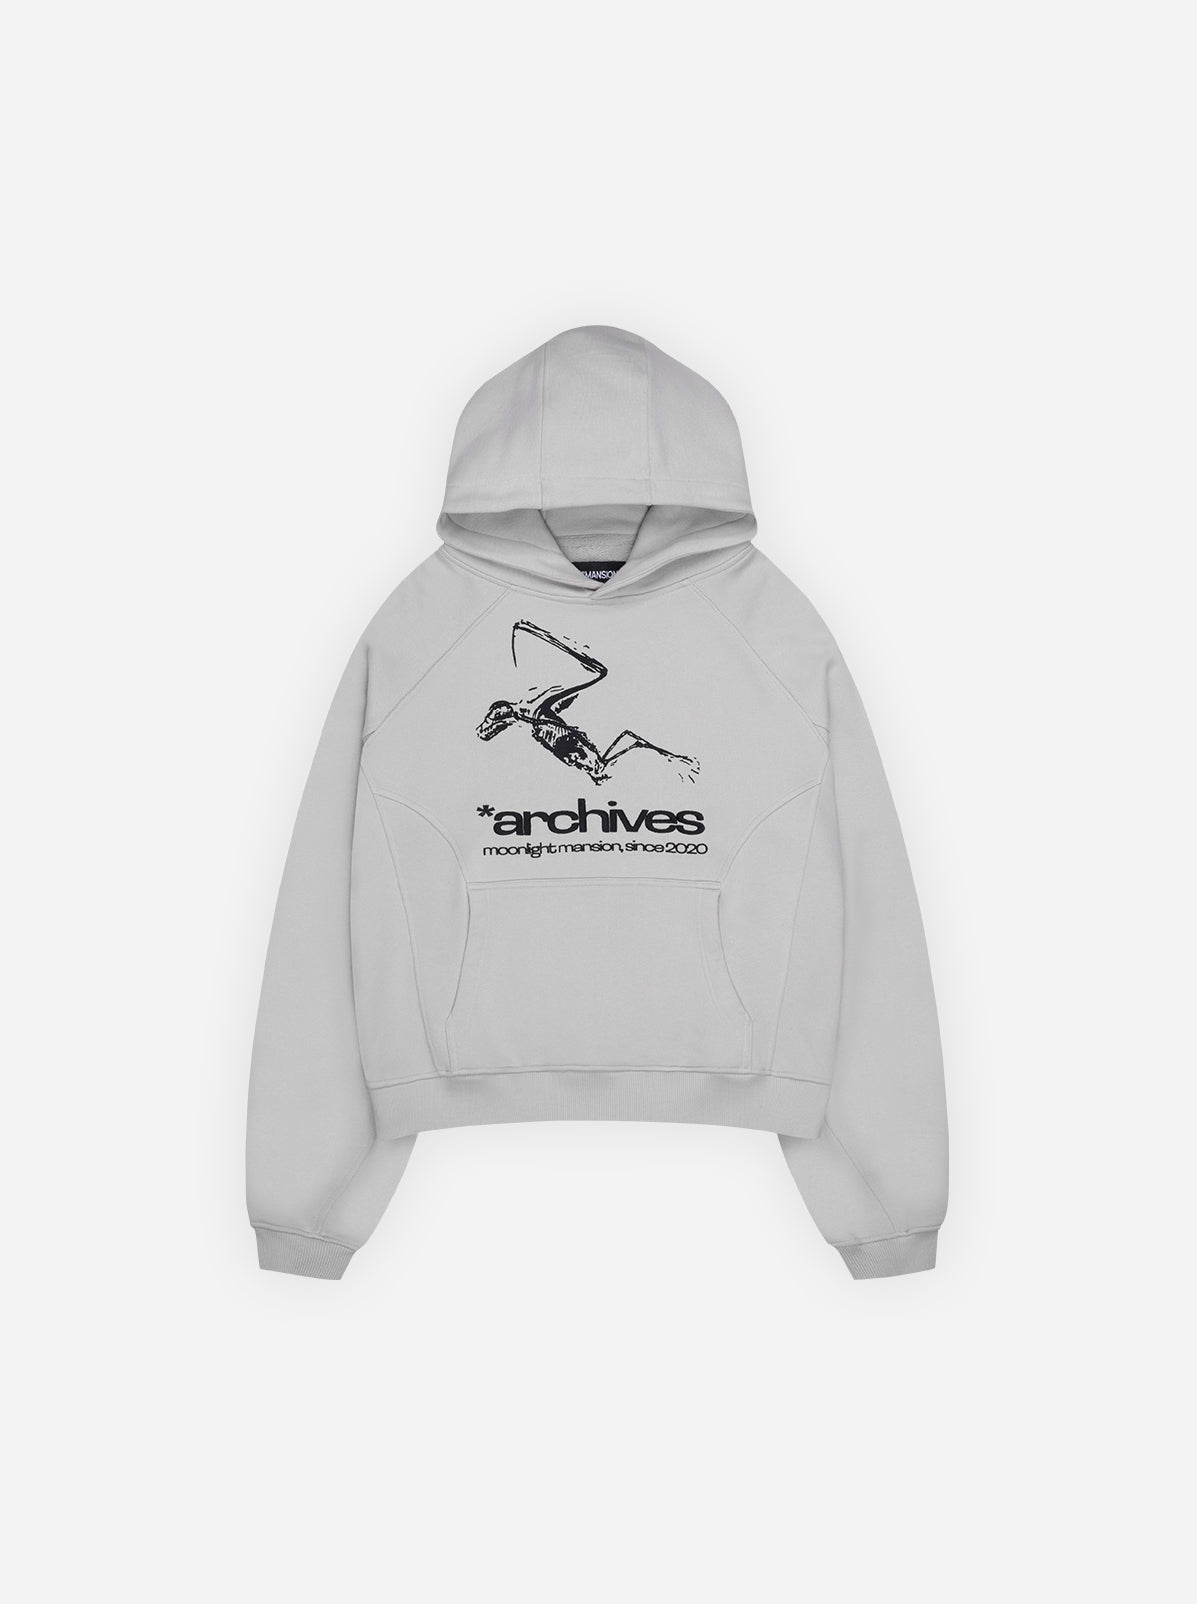 *ARCHIVES HOODIE- Gray